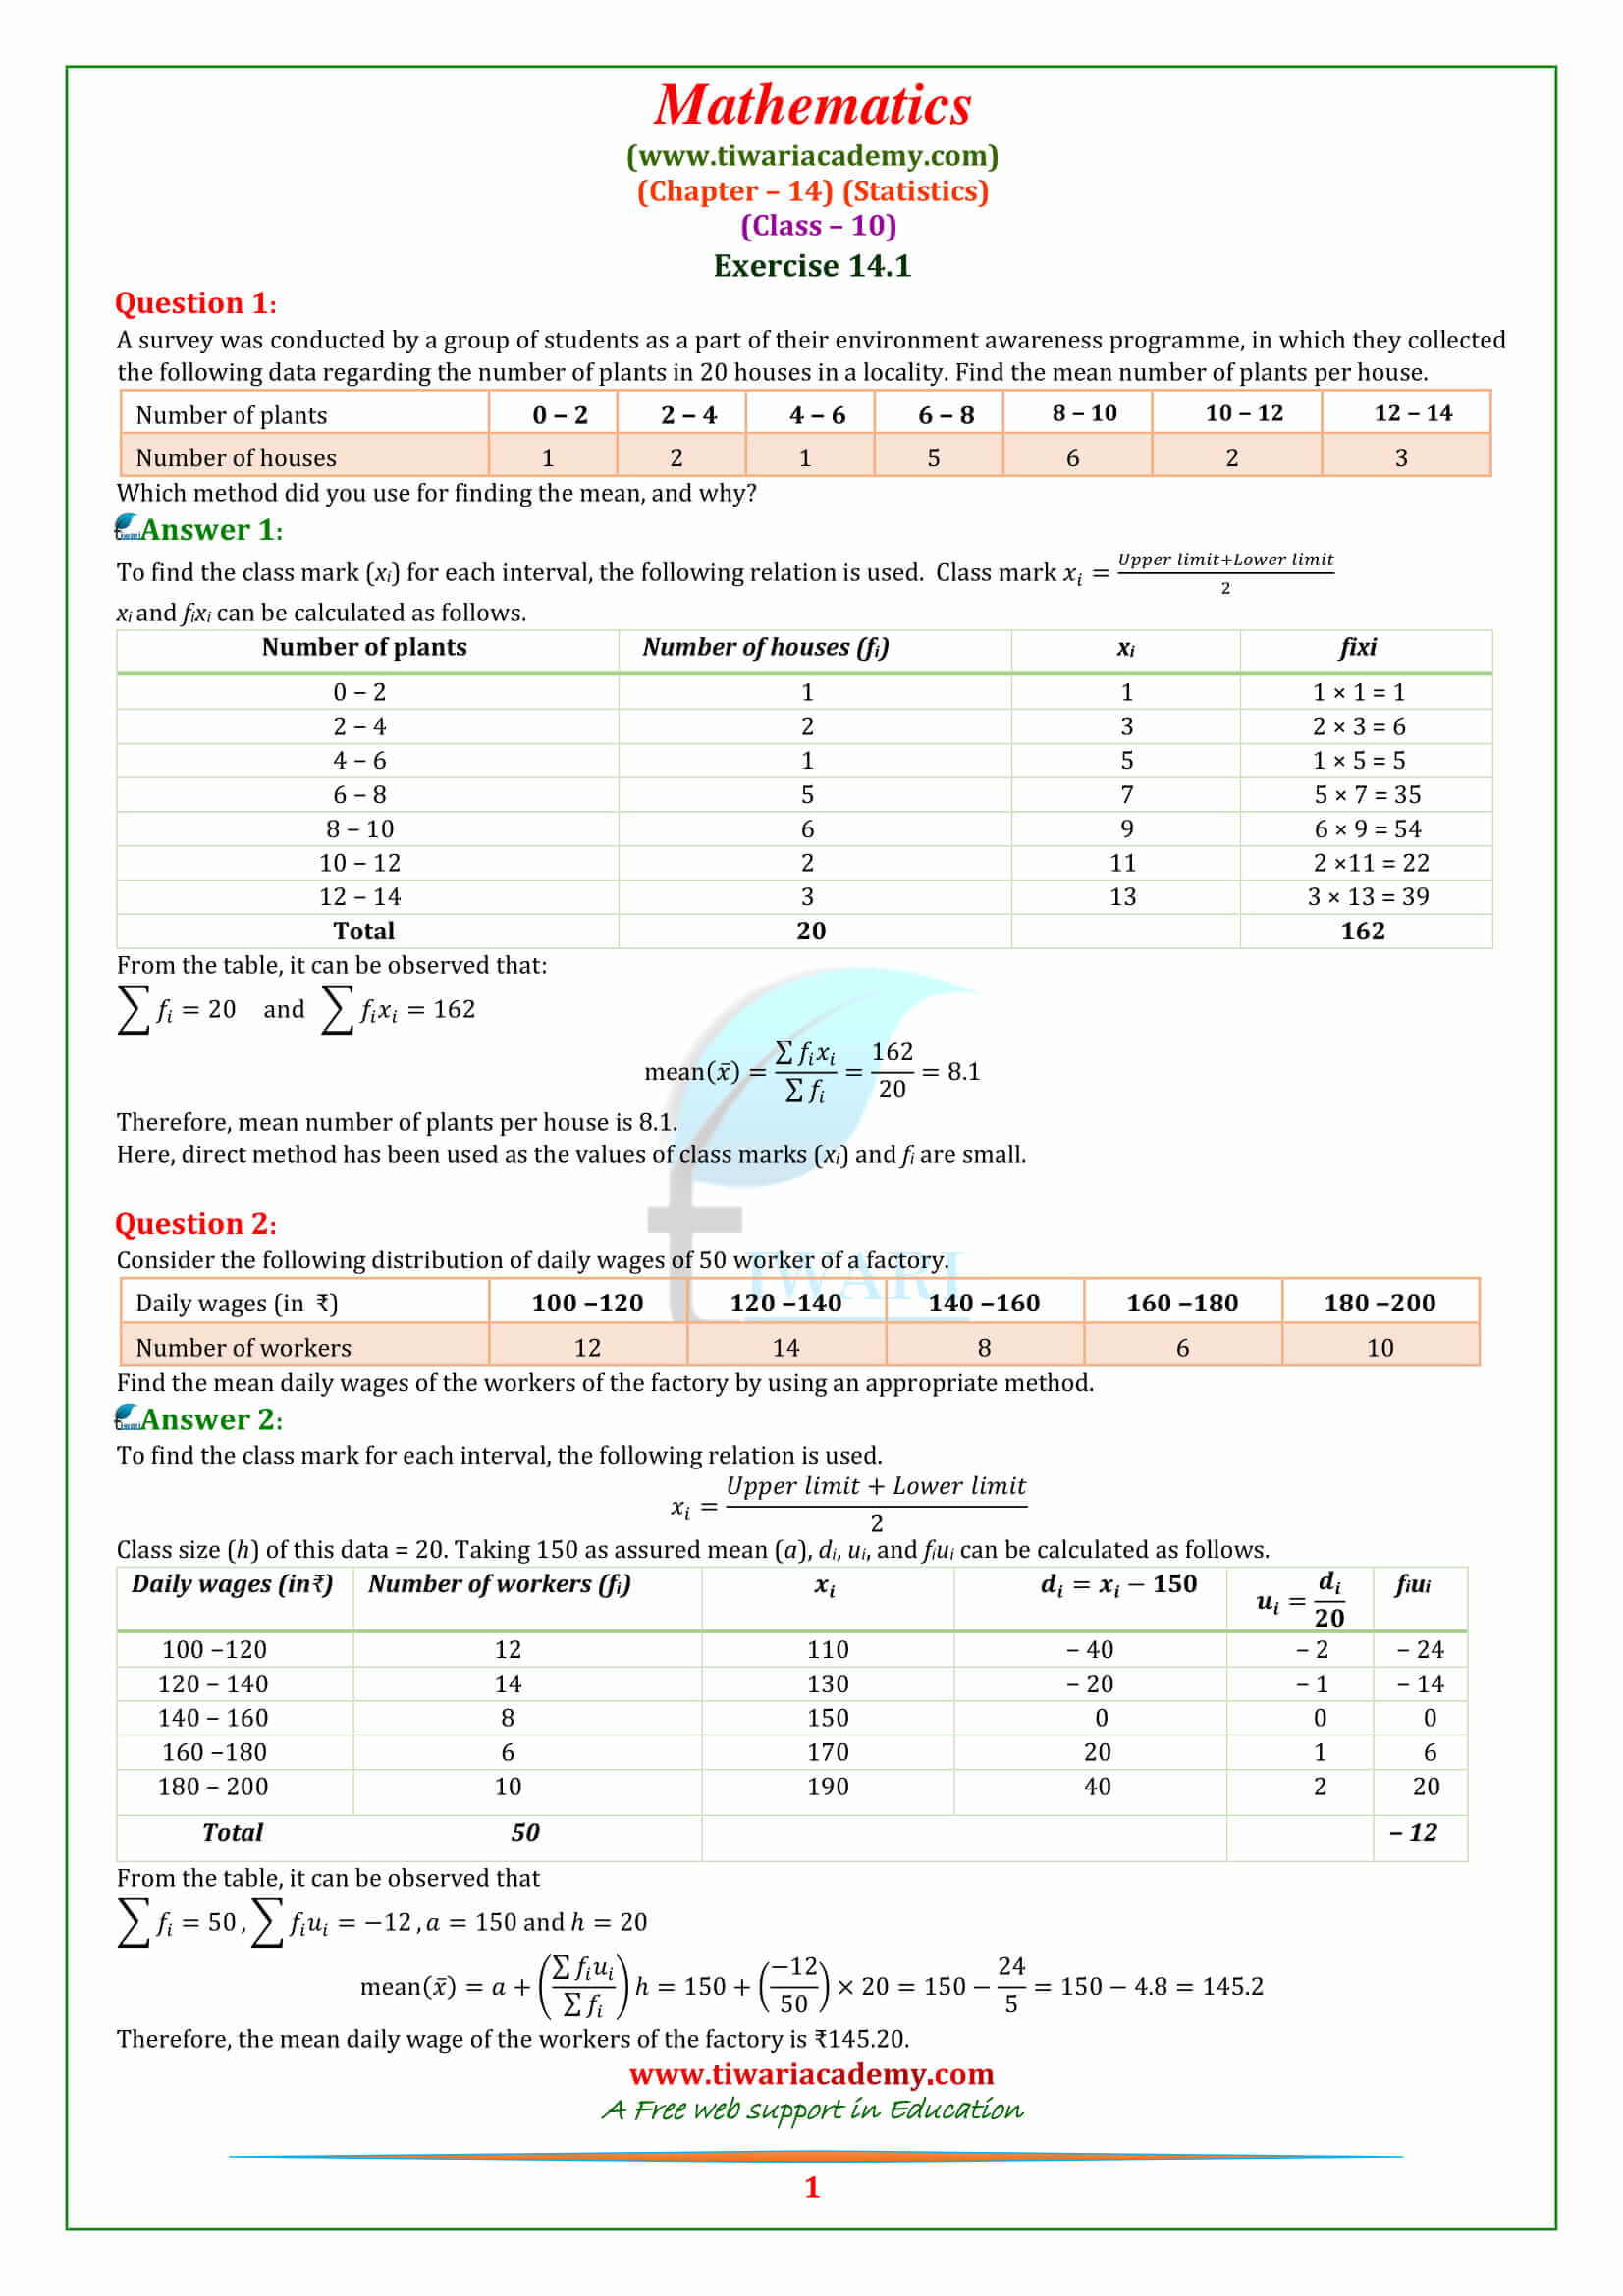 NCERT Solutions for class 10 Maths Chapter 14 Statistics Exercise 14.1 in pdf form